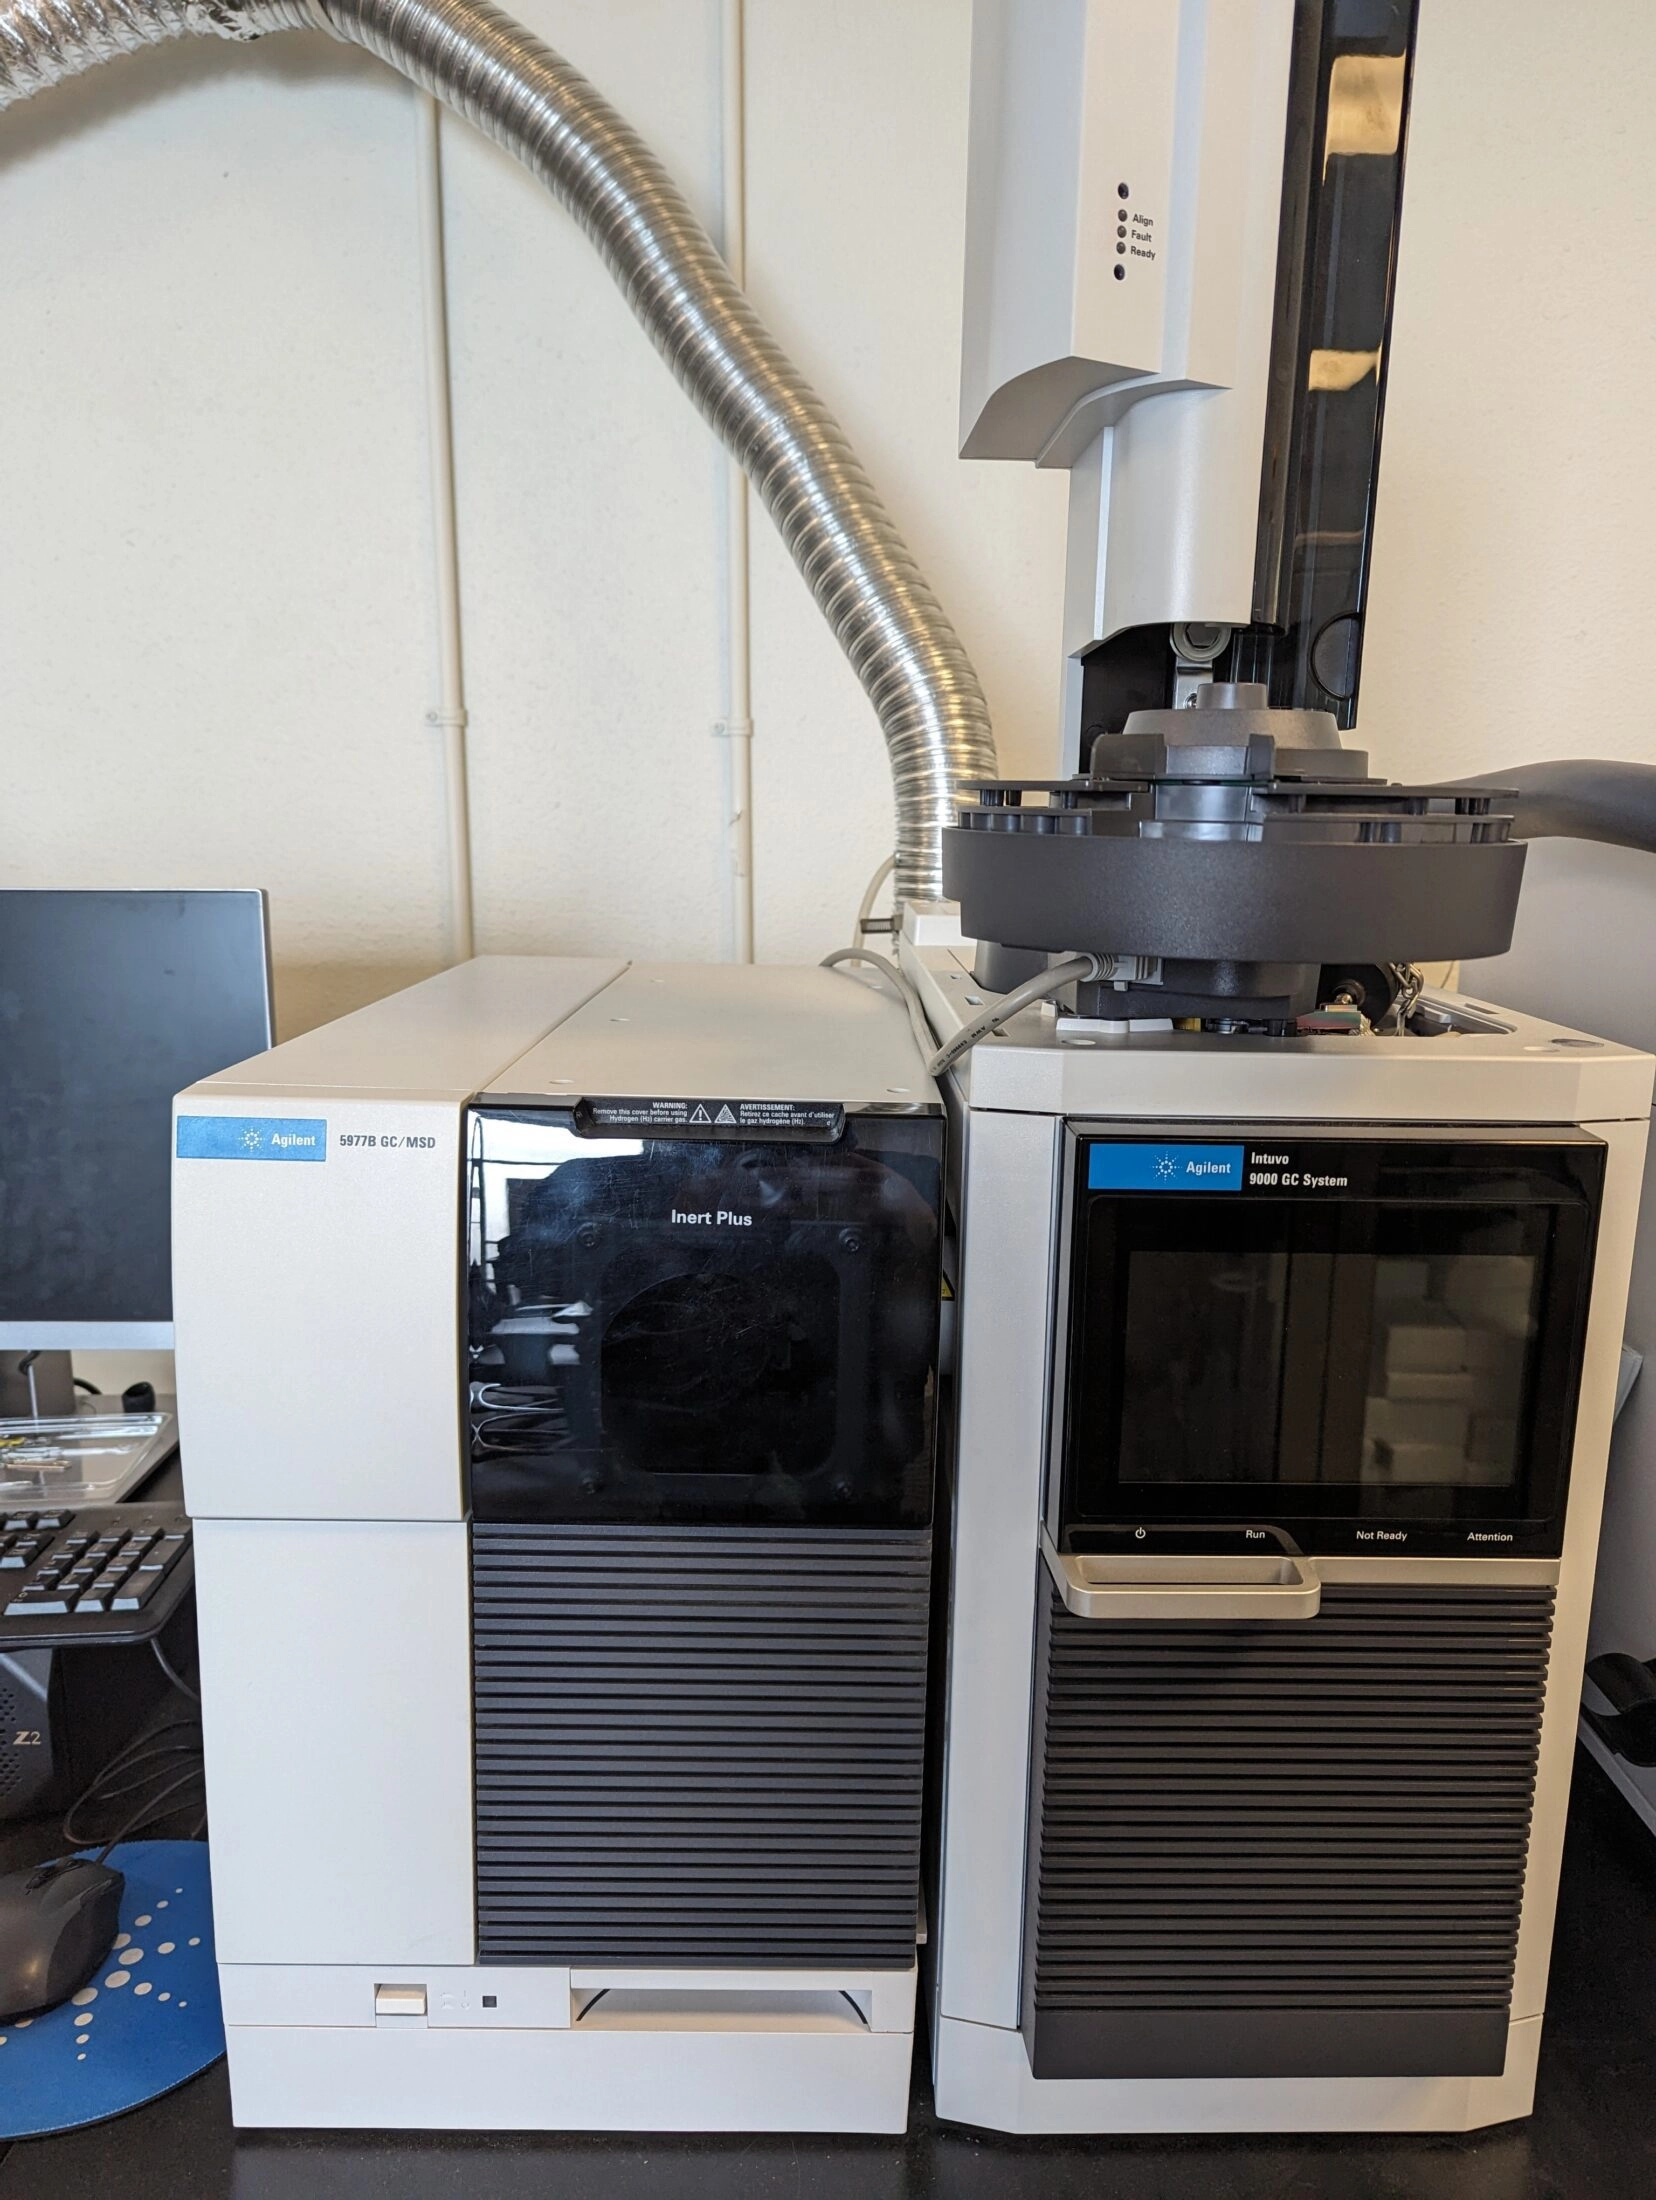 Agilent 5977B GC/MSD with Intuvo 9000 GC System/7607A Headspace Autosampler